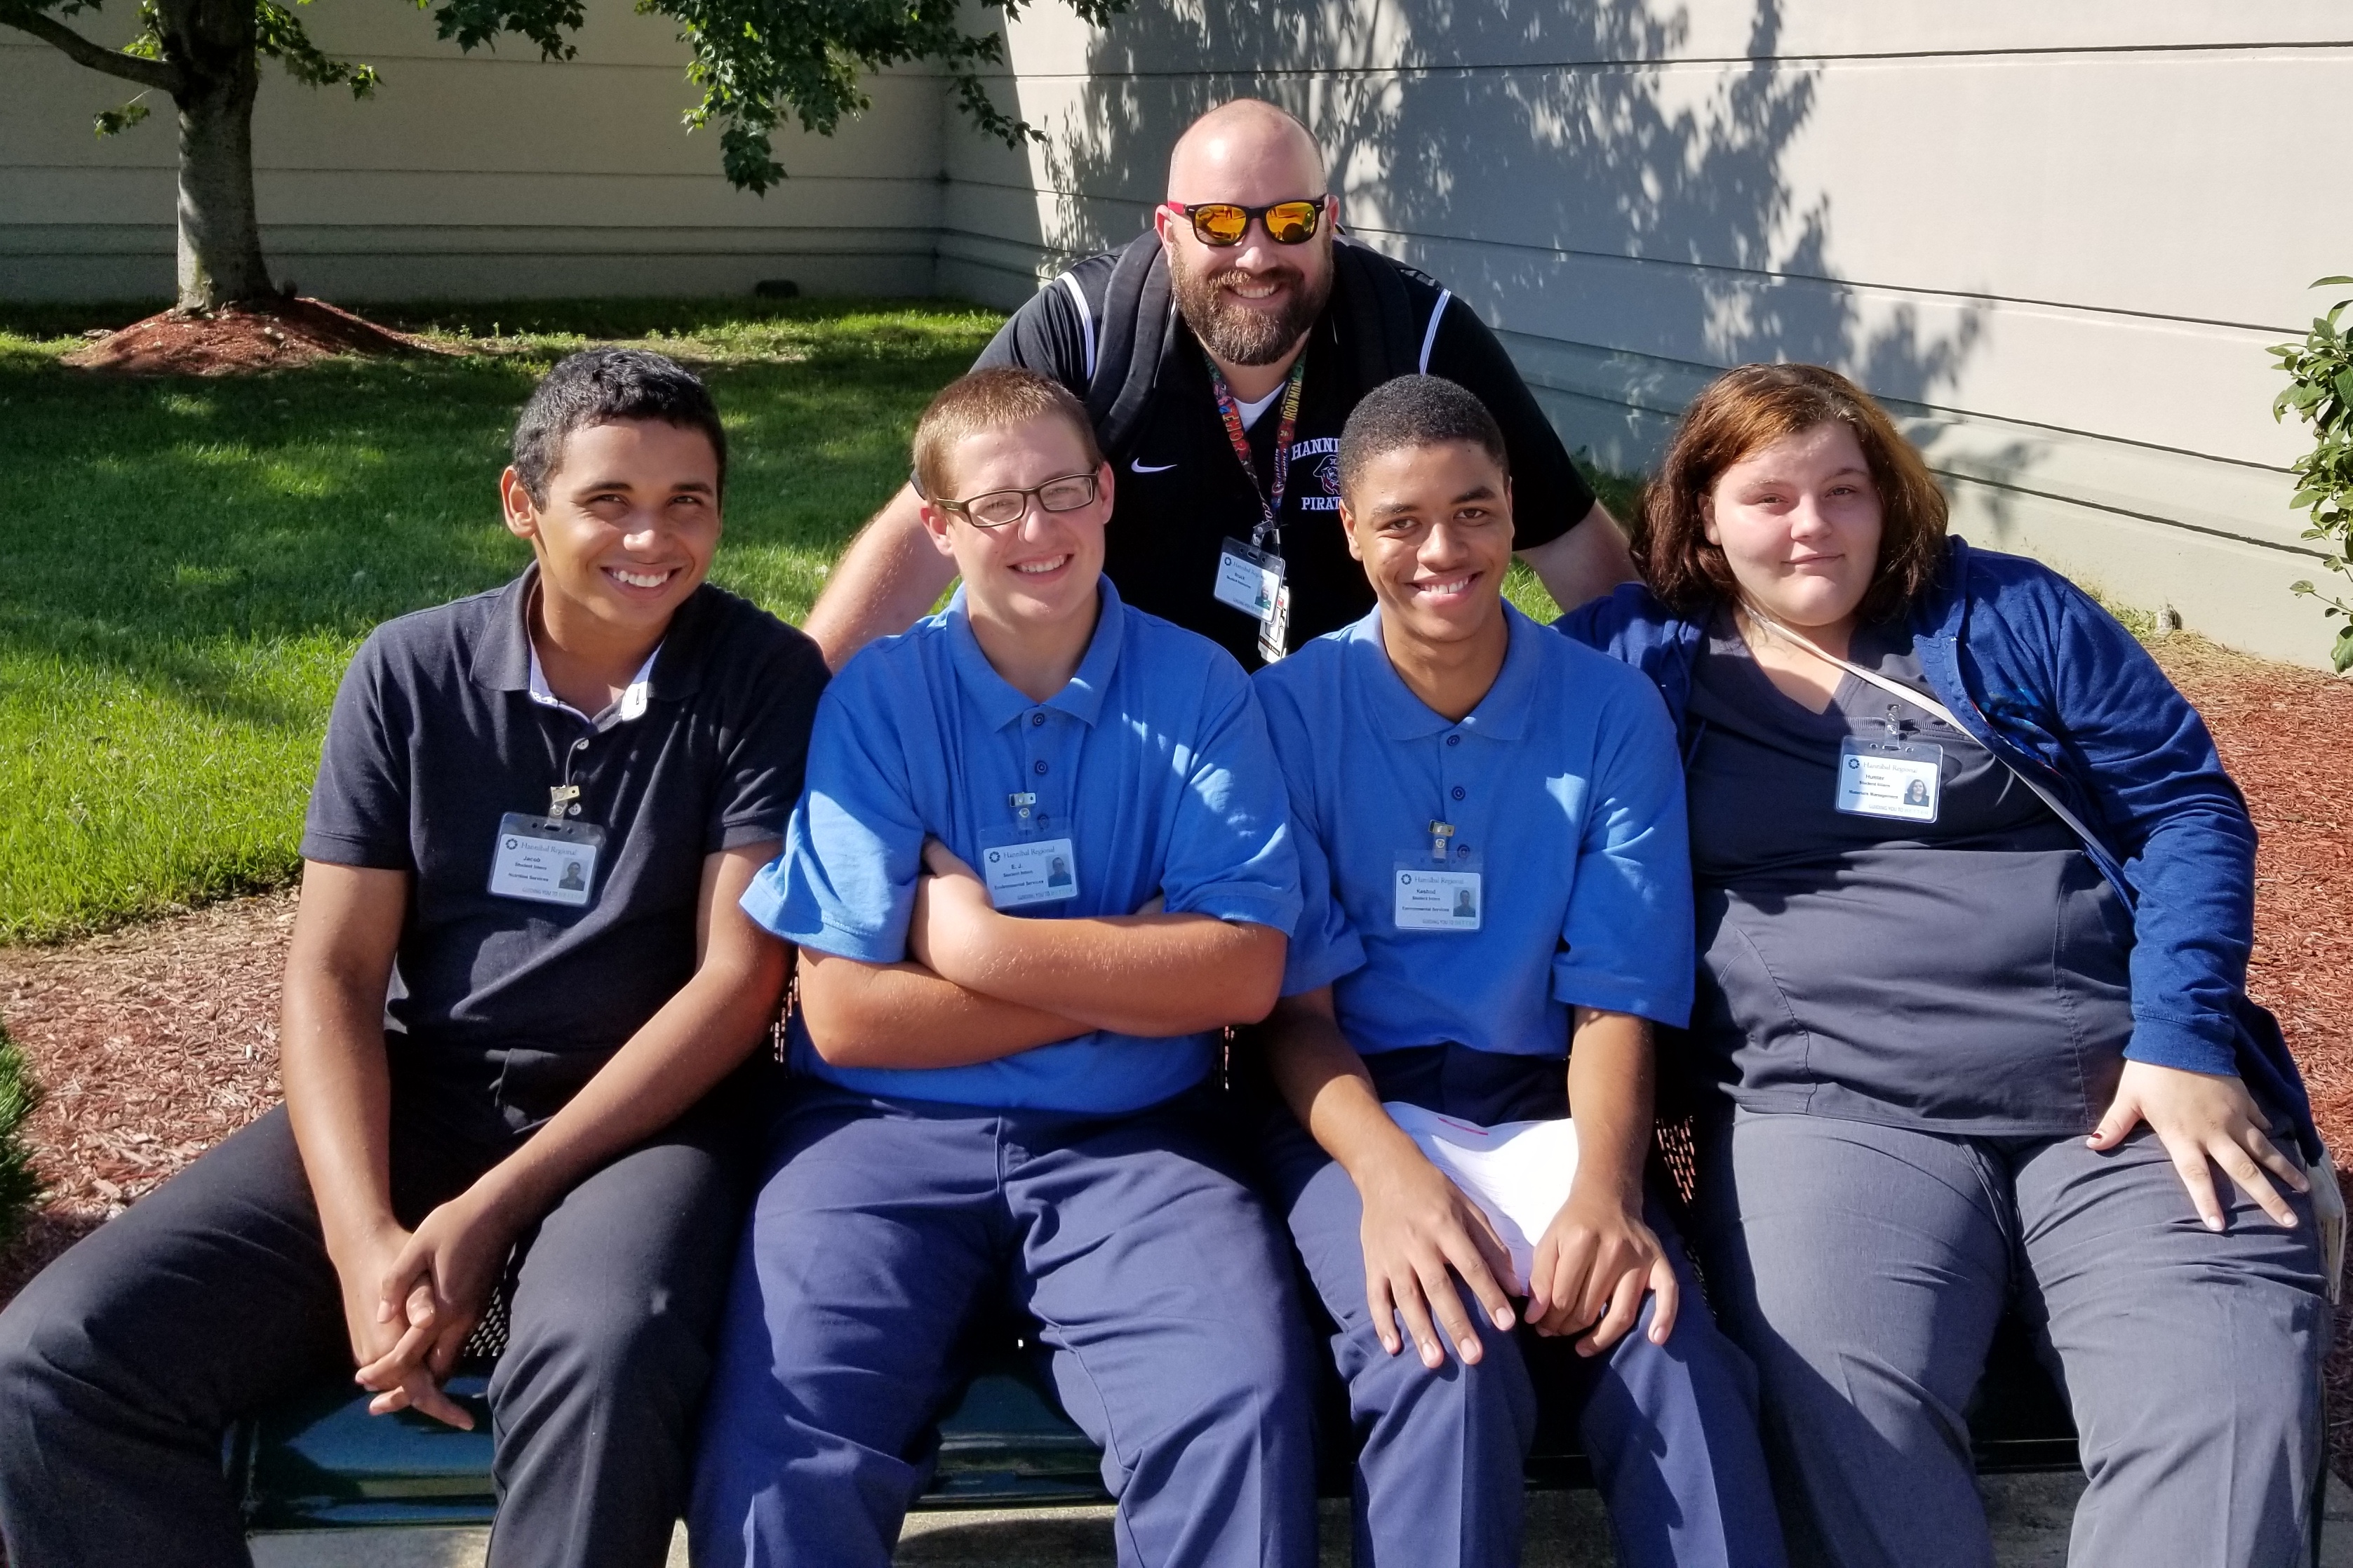 HEALTHY FUTURES IN SPECIAL EDUCATION—Hannibal Public School District’s Basic Employment Skills Training program helps students with special needs learn life skills through work experience at a local hospital.